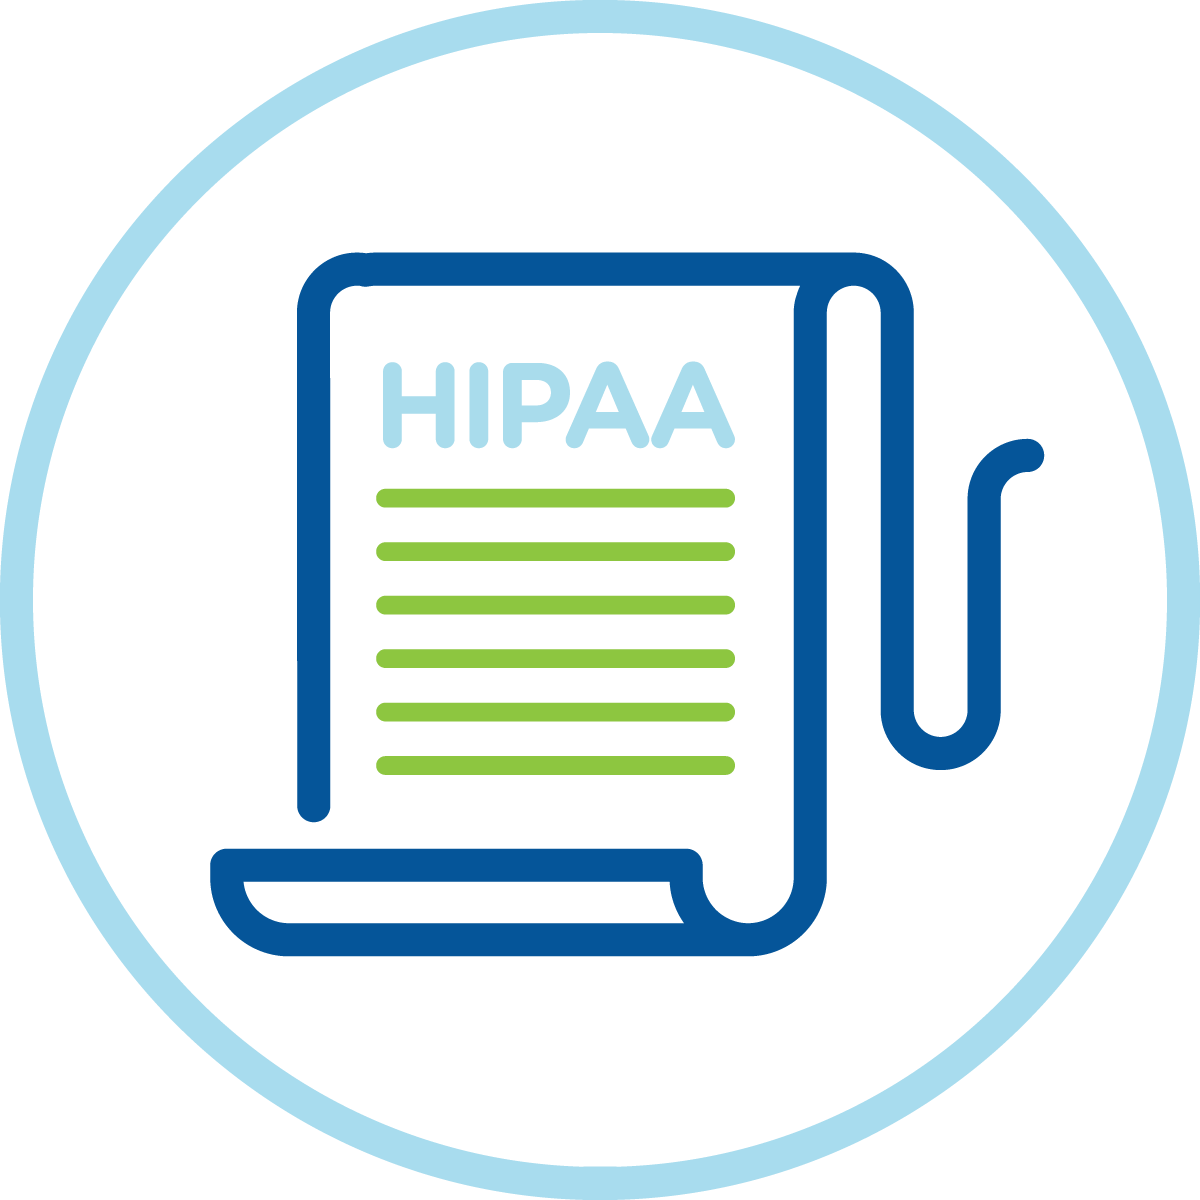 Illustration of a HIPAA document